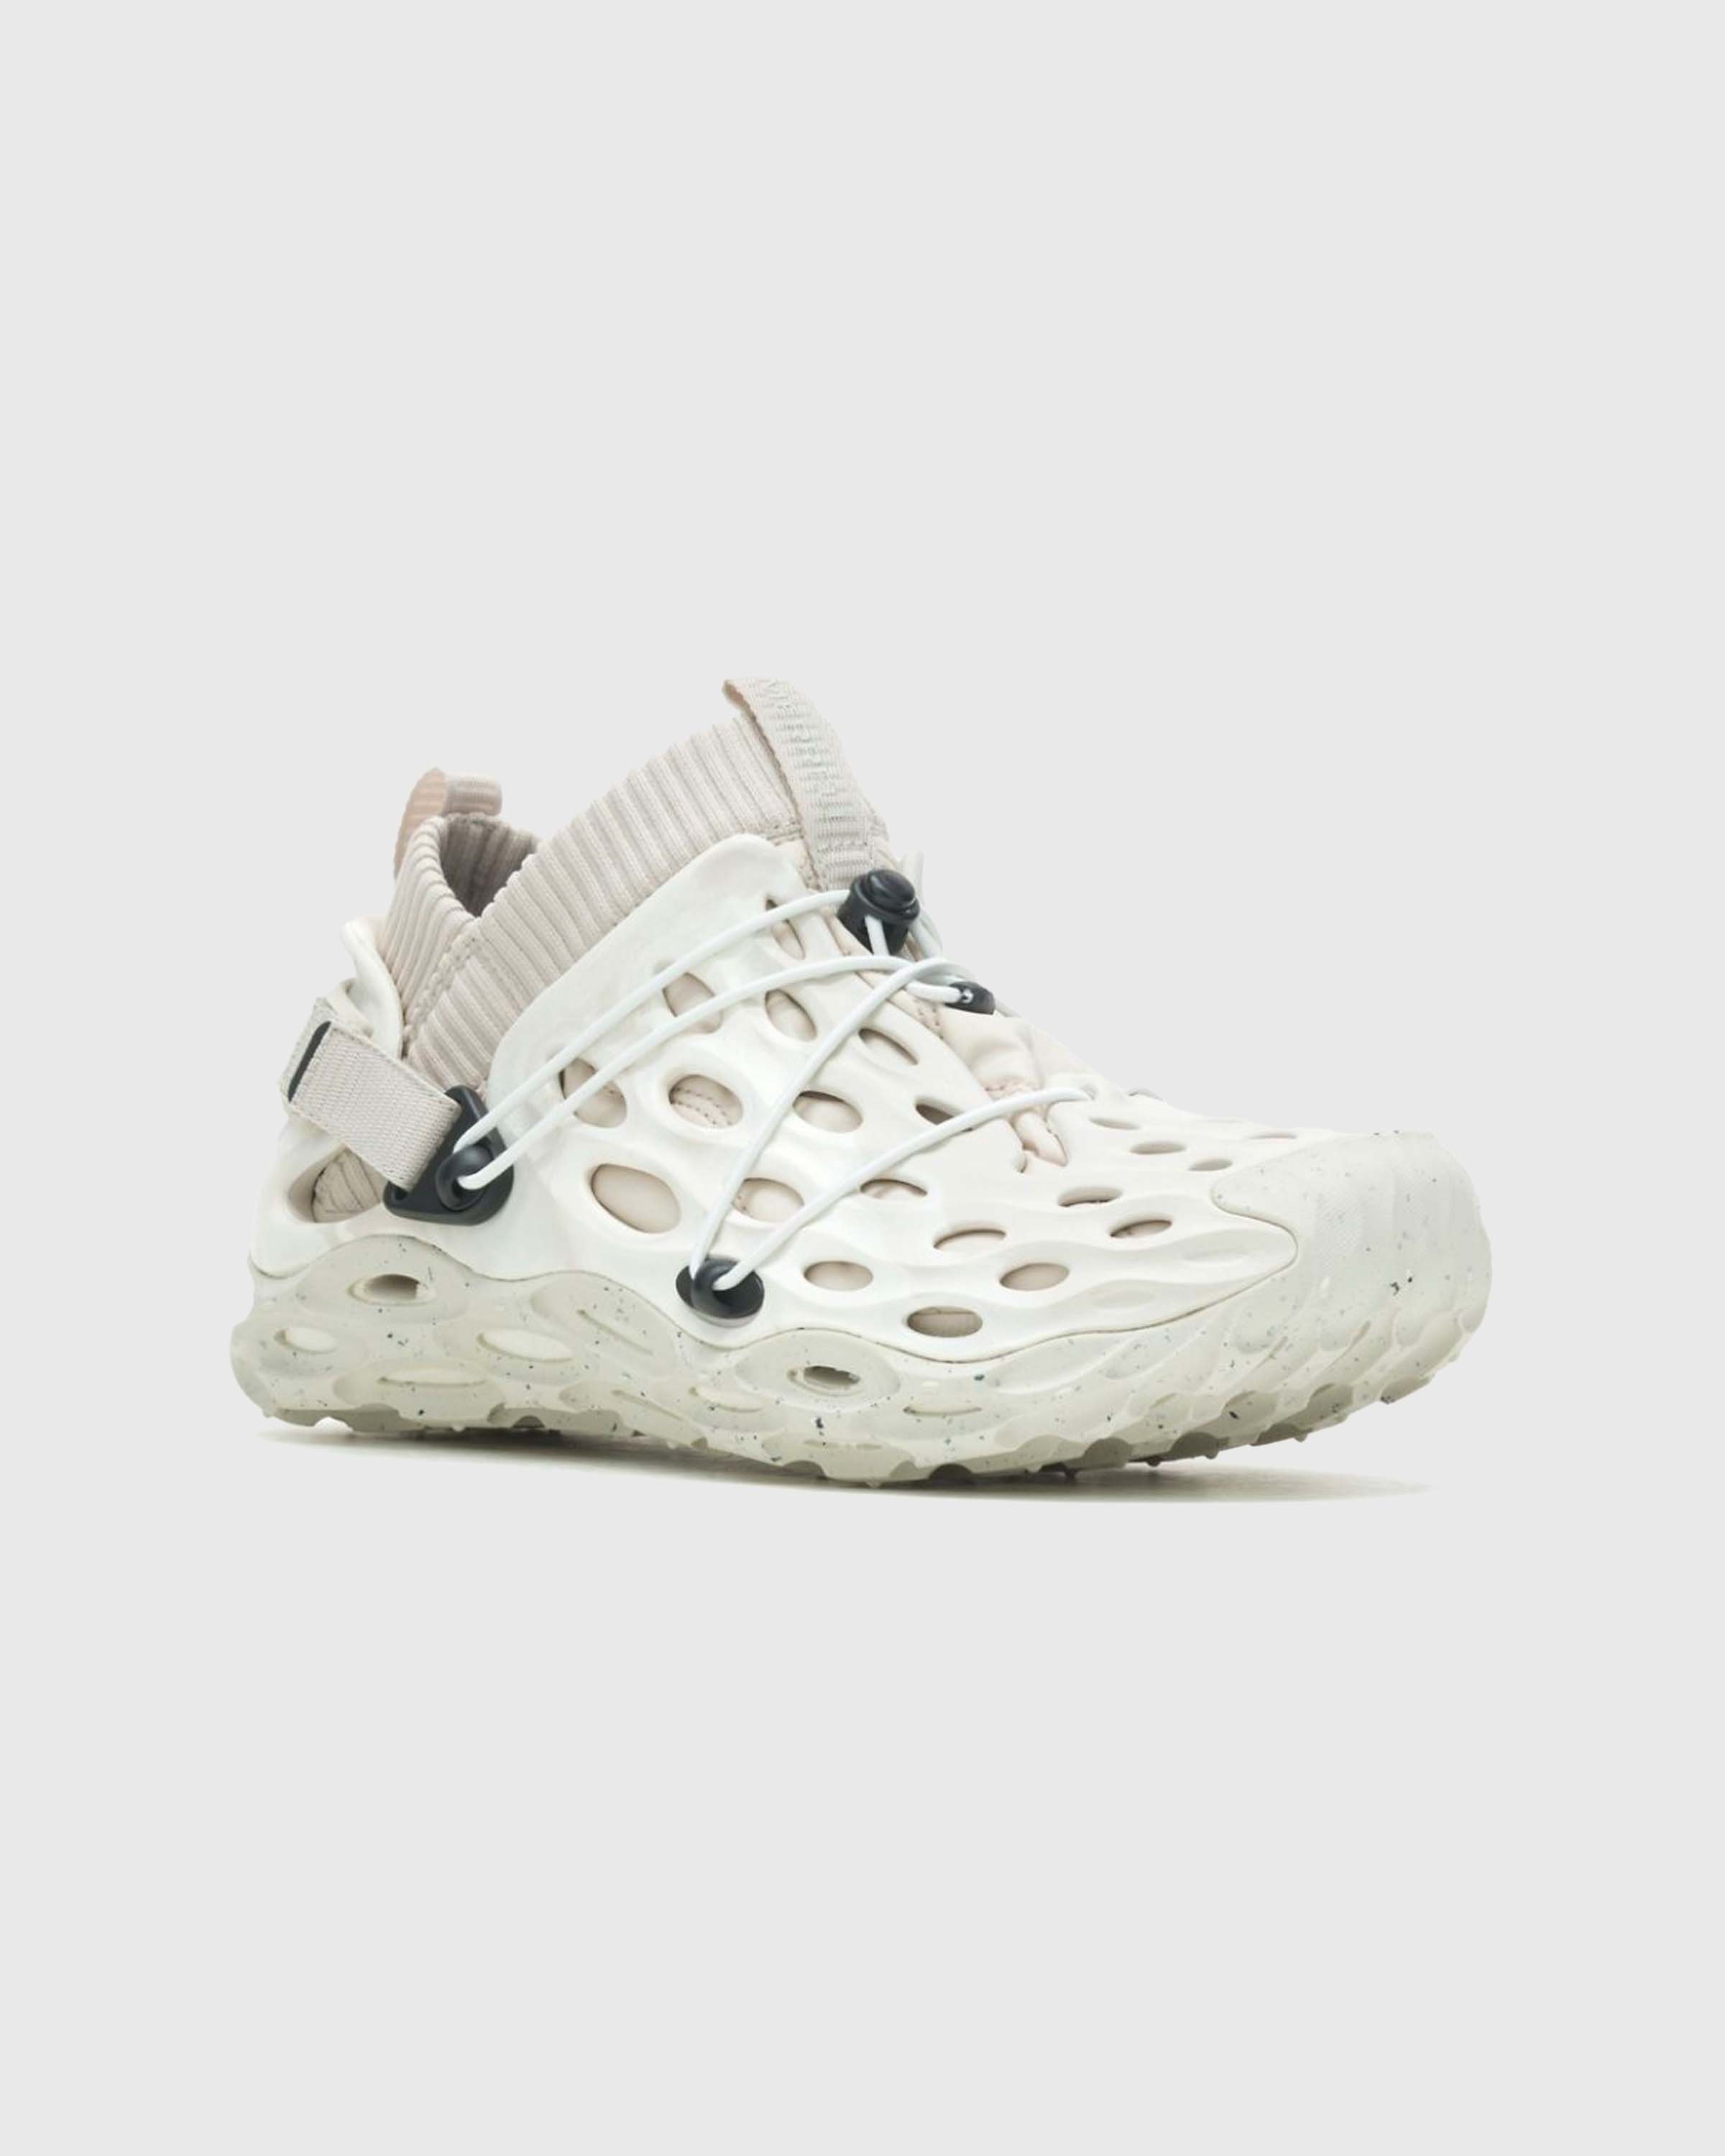 Merrell - Hydro Moc AT Ripstop 1TRL White - Footwear - White - Image 3